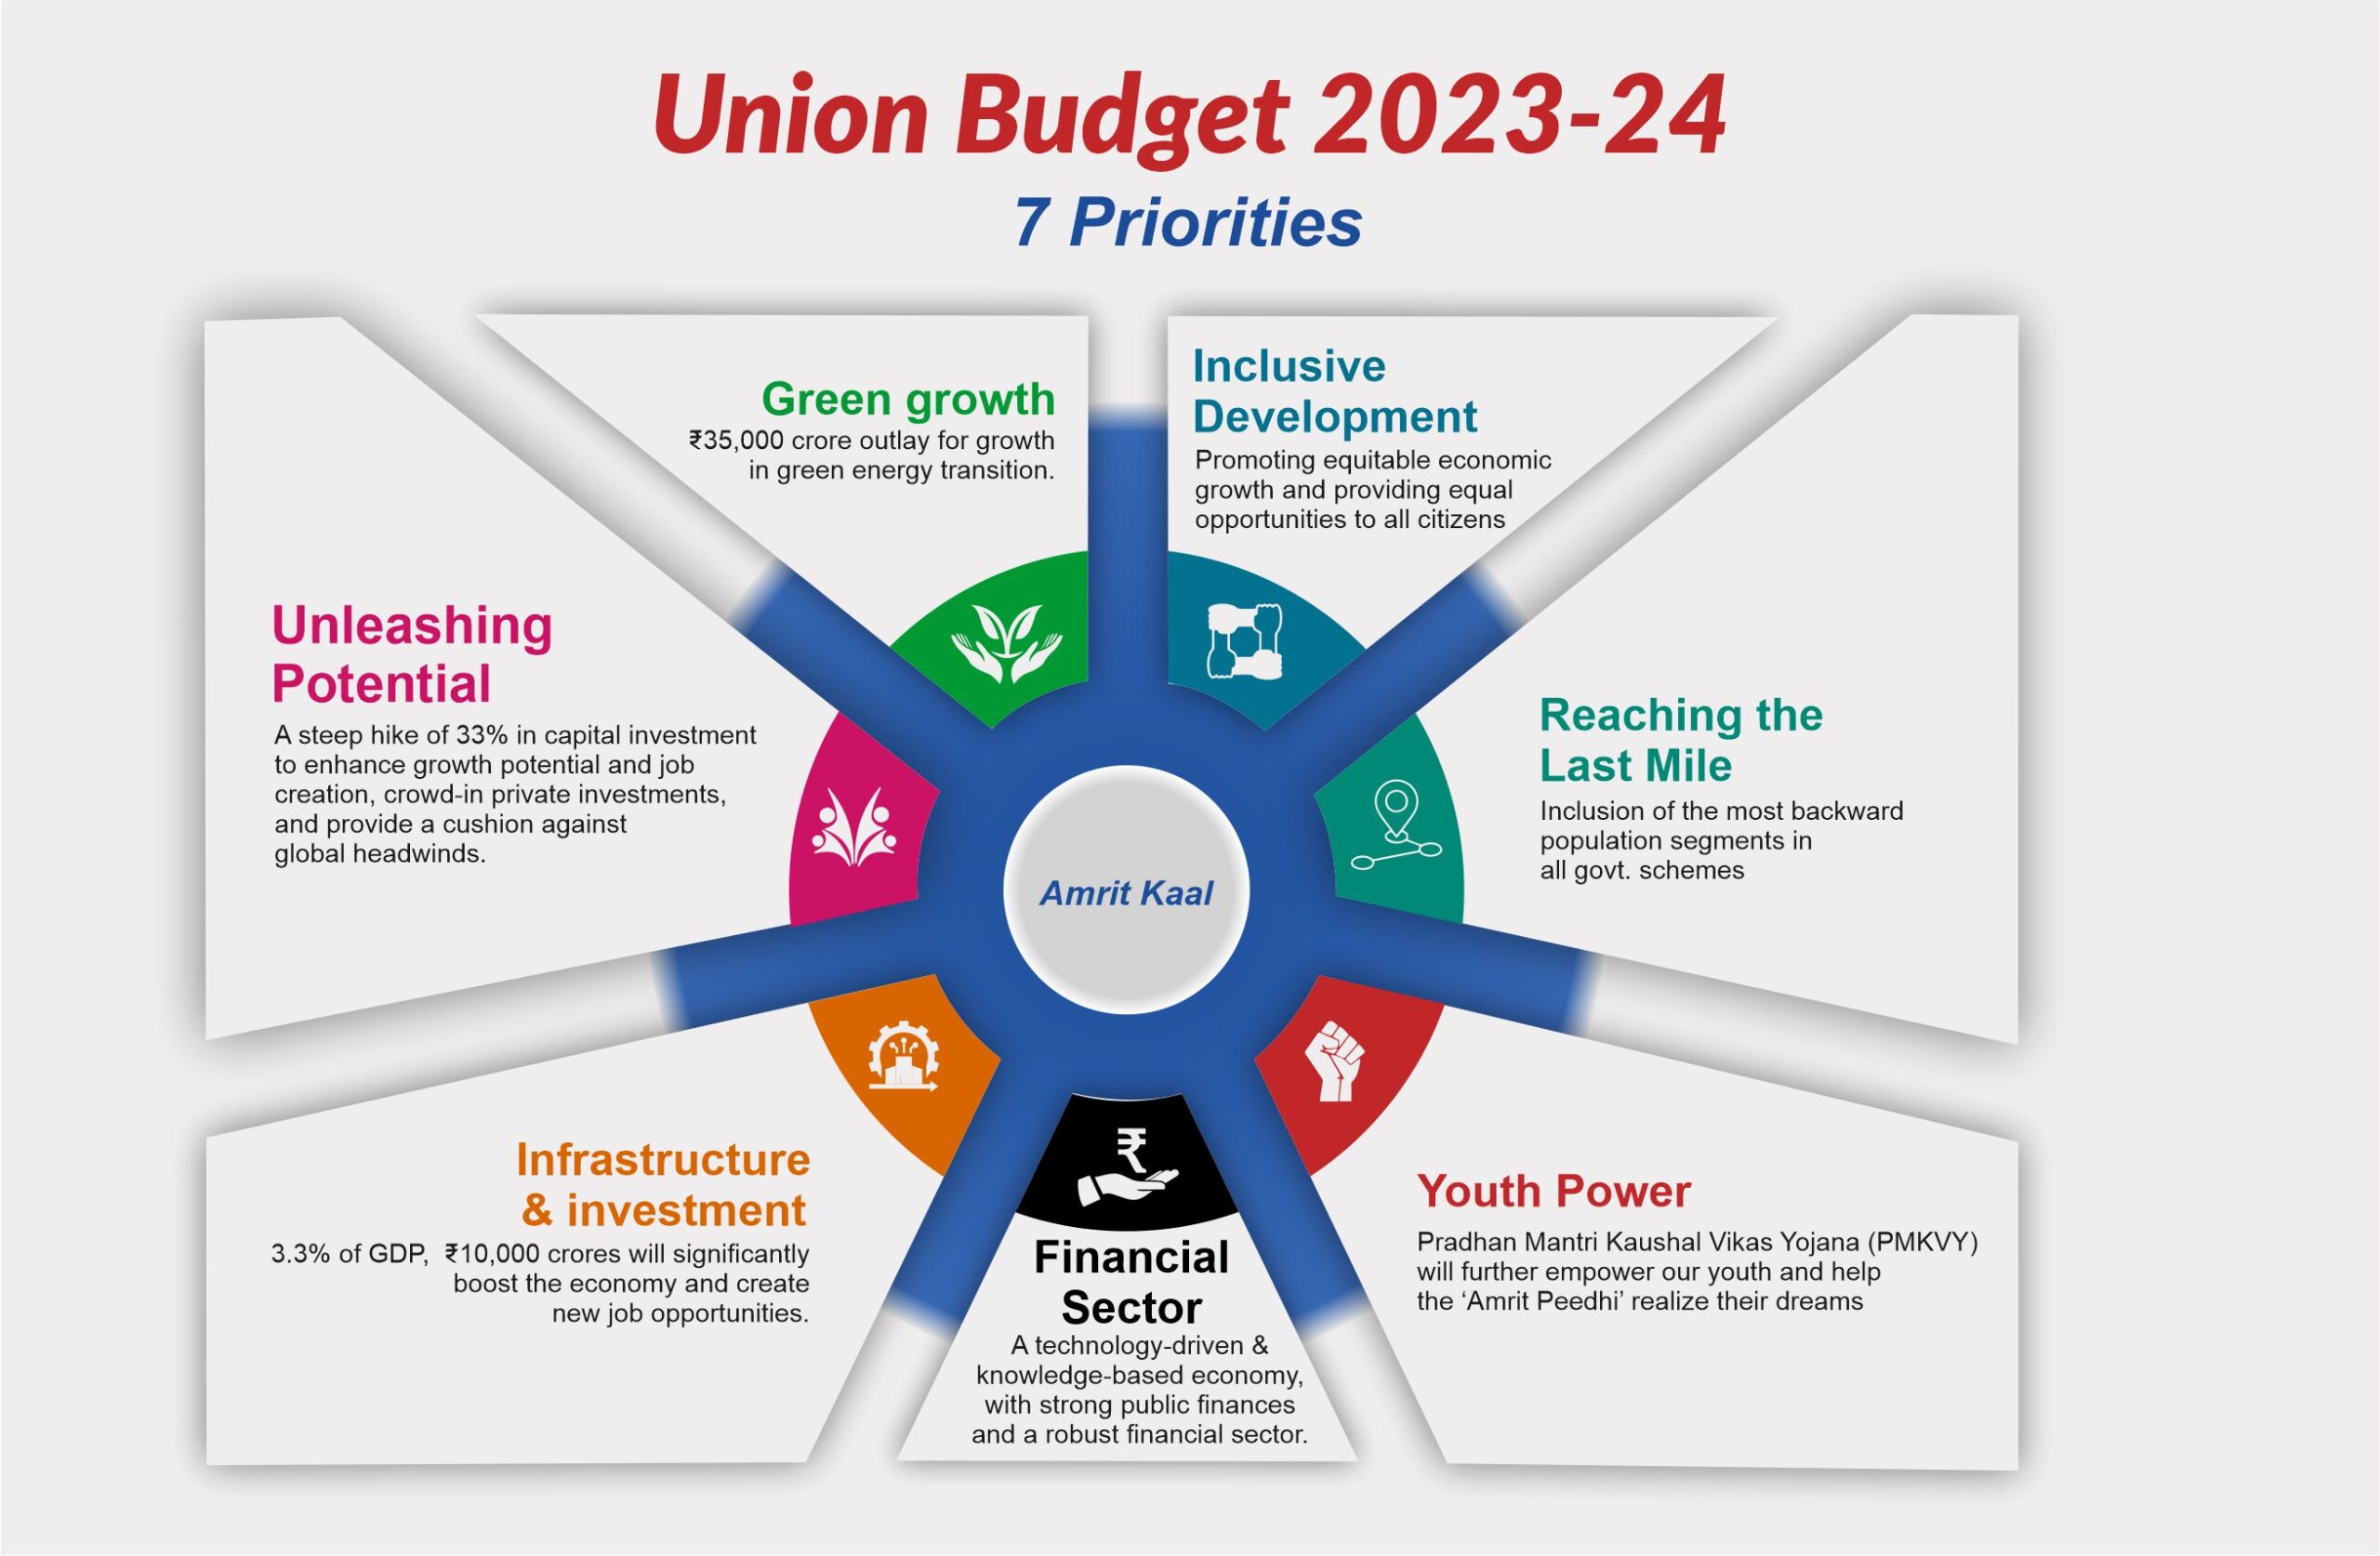 Union Budget 202324 Highlights & Complete Budget Analysis